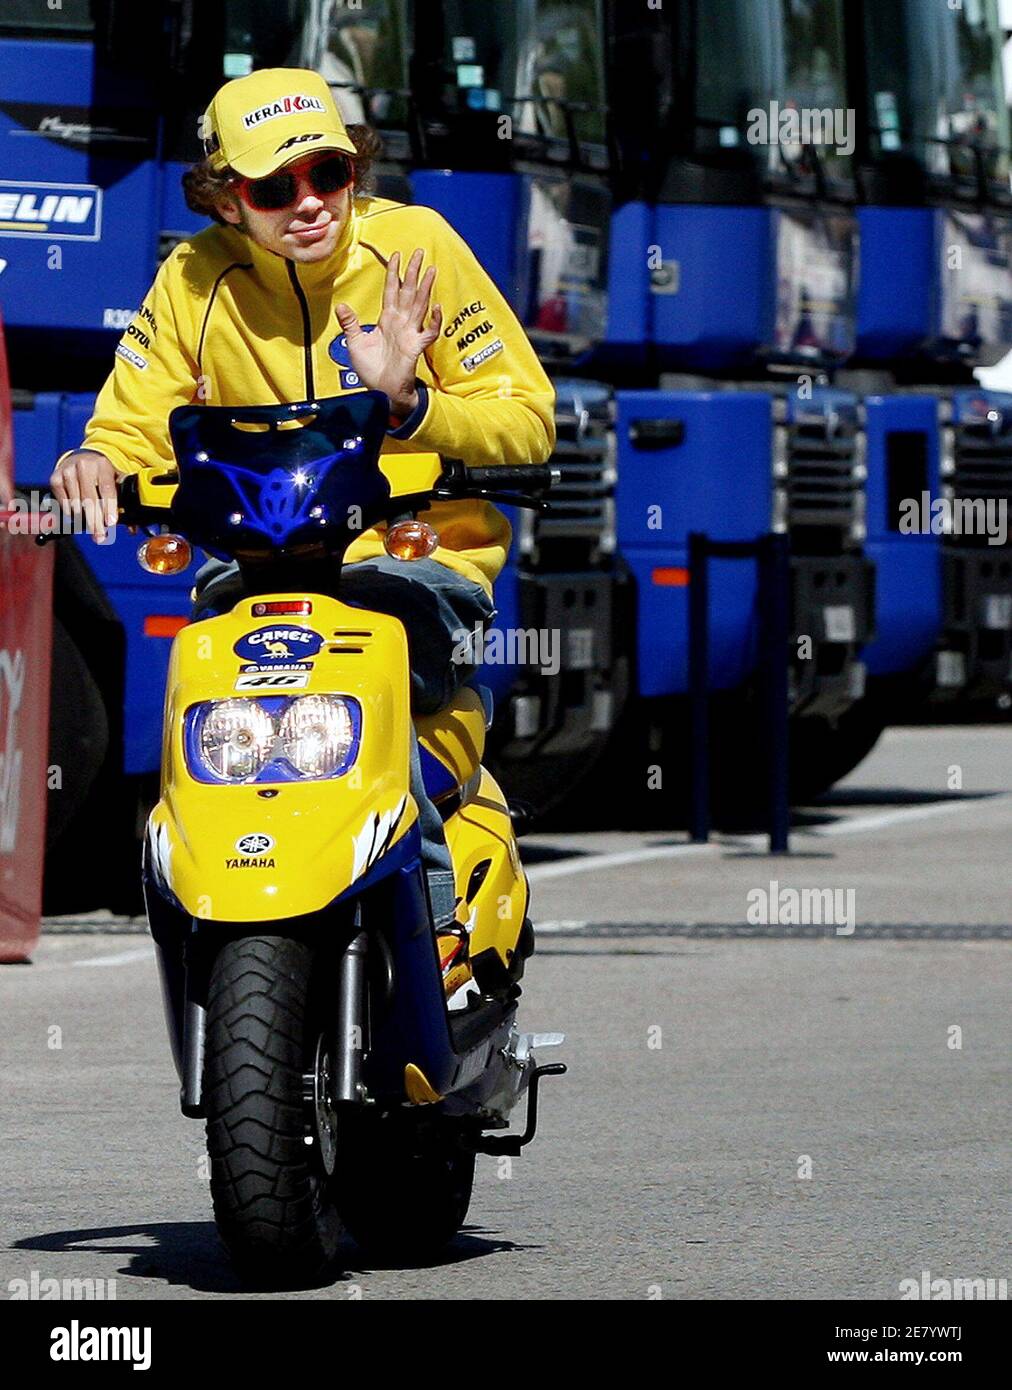 MotoGP rider Valentino Rossi of Italy rides a scooter before a training  session at the Jerez racetrack in southern Spain, March 10, 2006. The new  MotoGP season kicks off in Jerez on